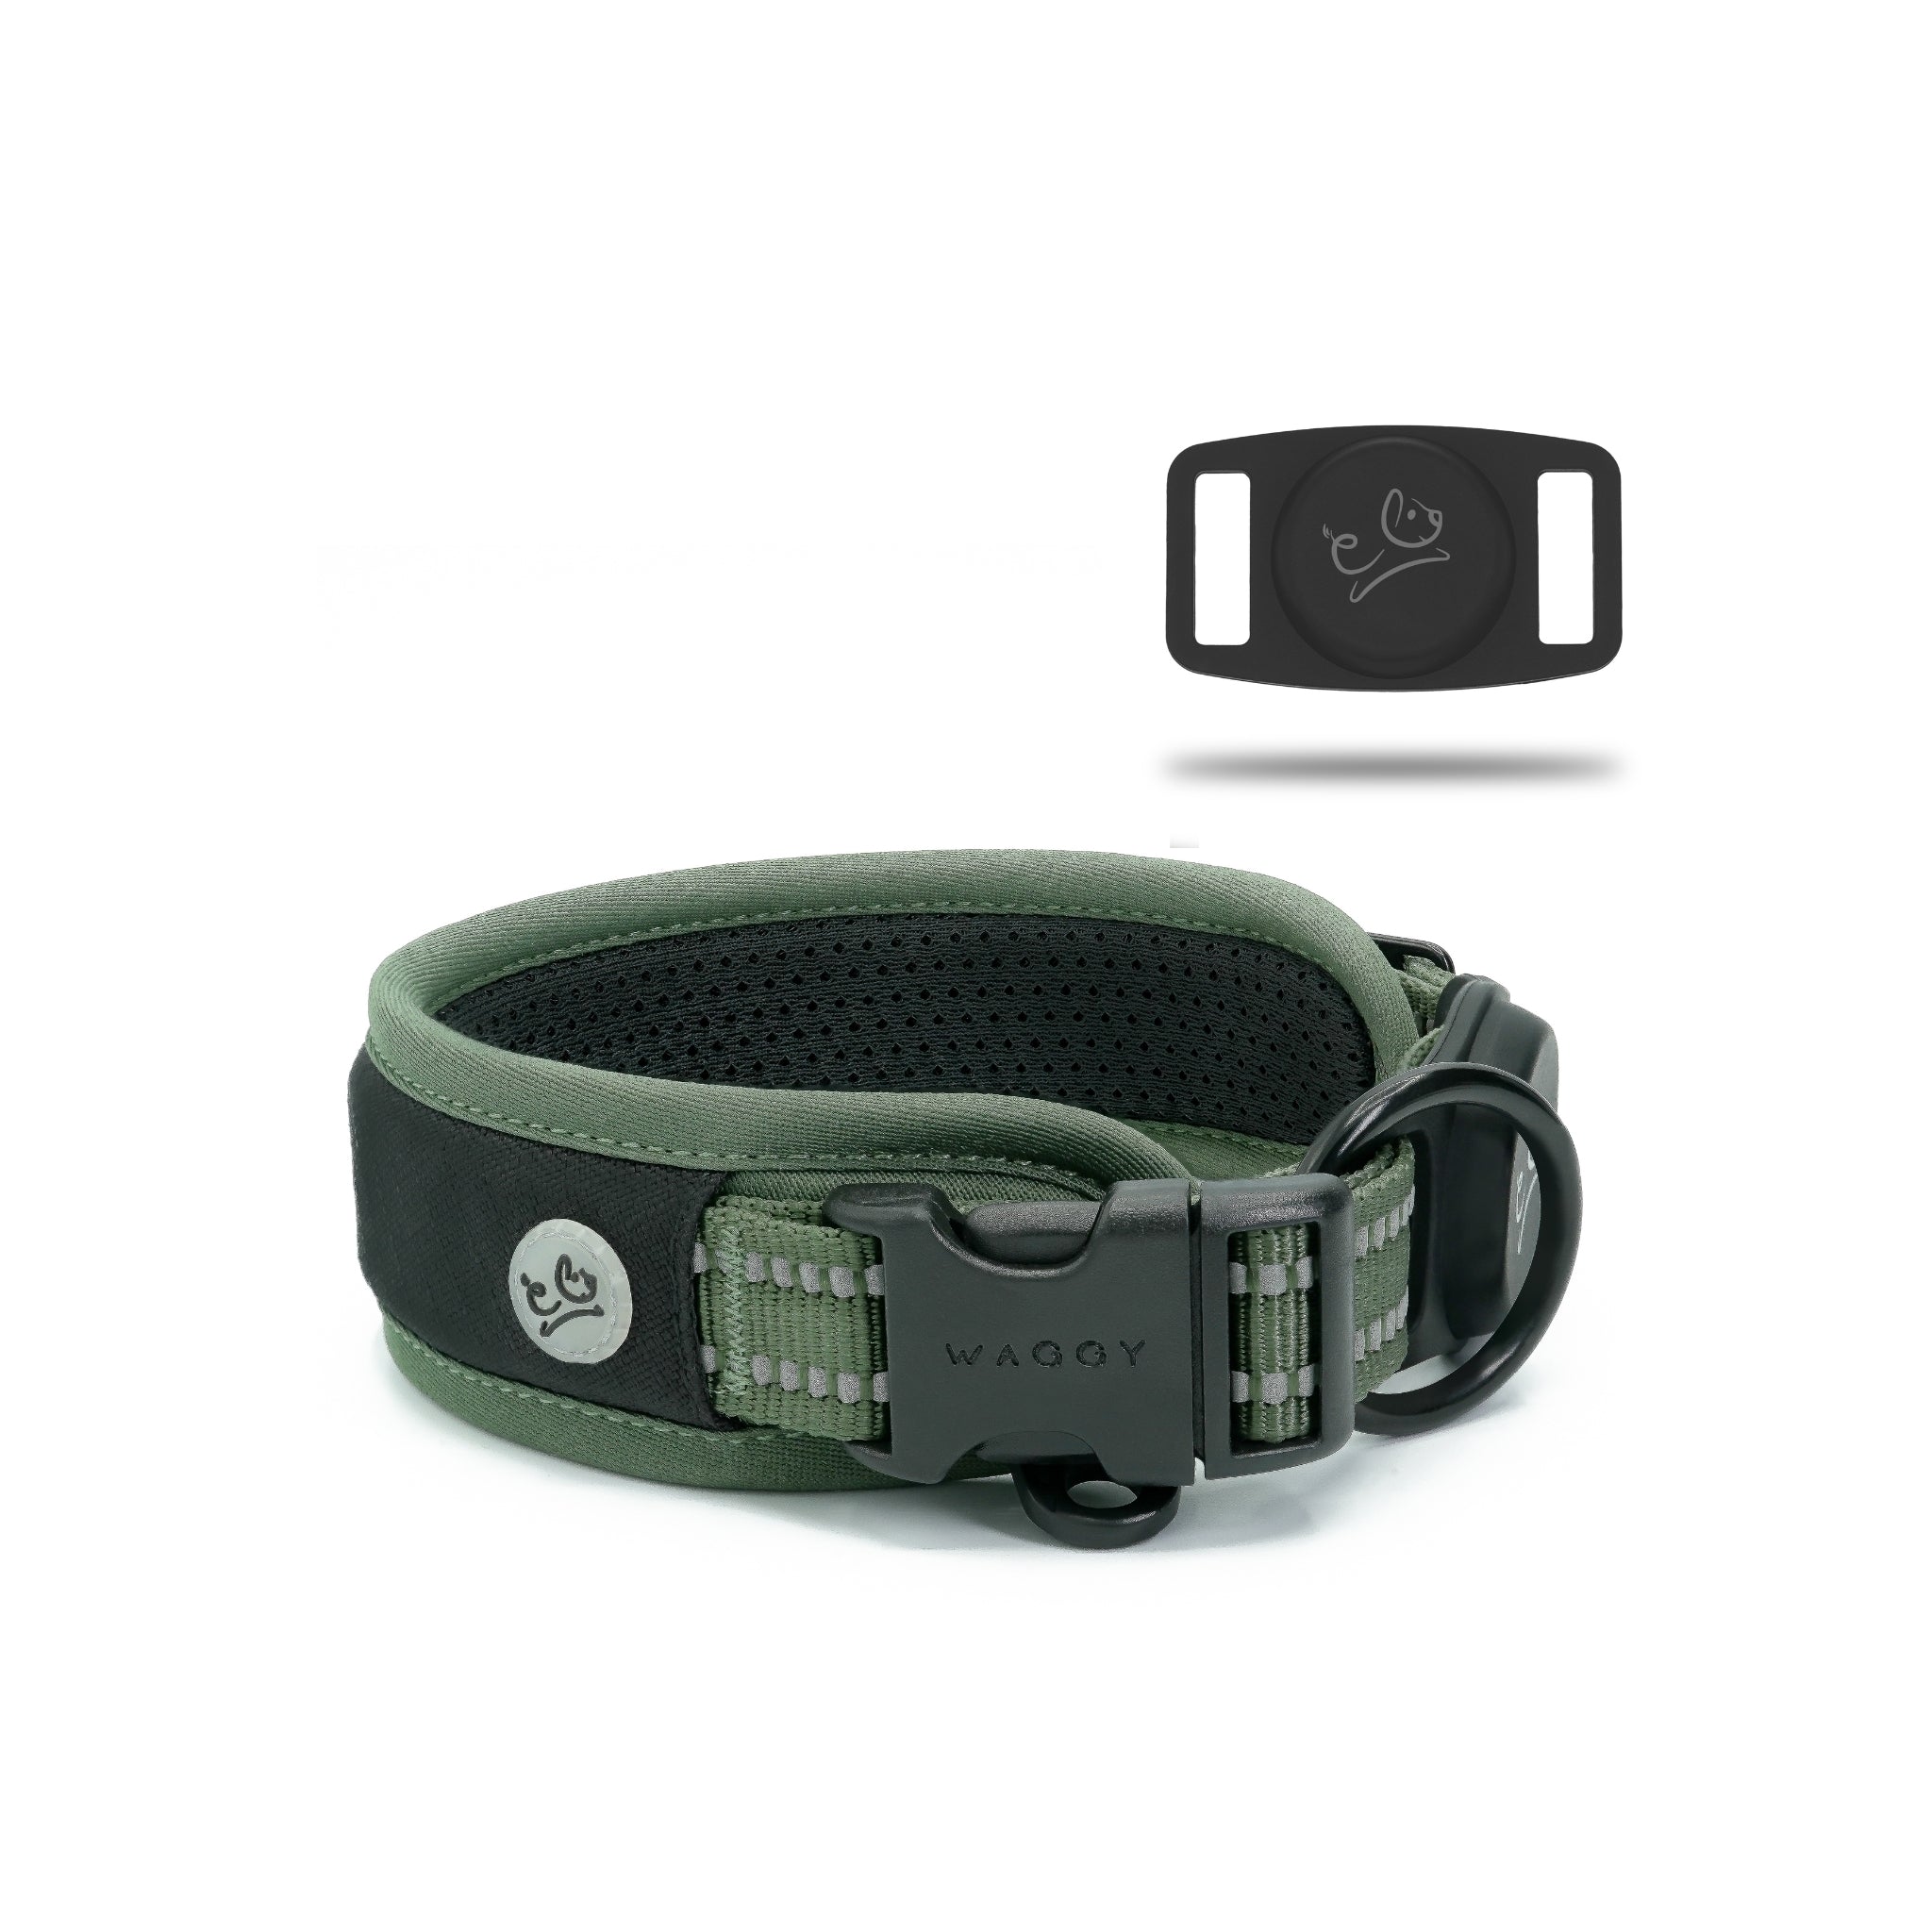 Front of the green collar showing the inside of the air mesh padding. Airtag holder on the right corner displaying Waggy logo.